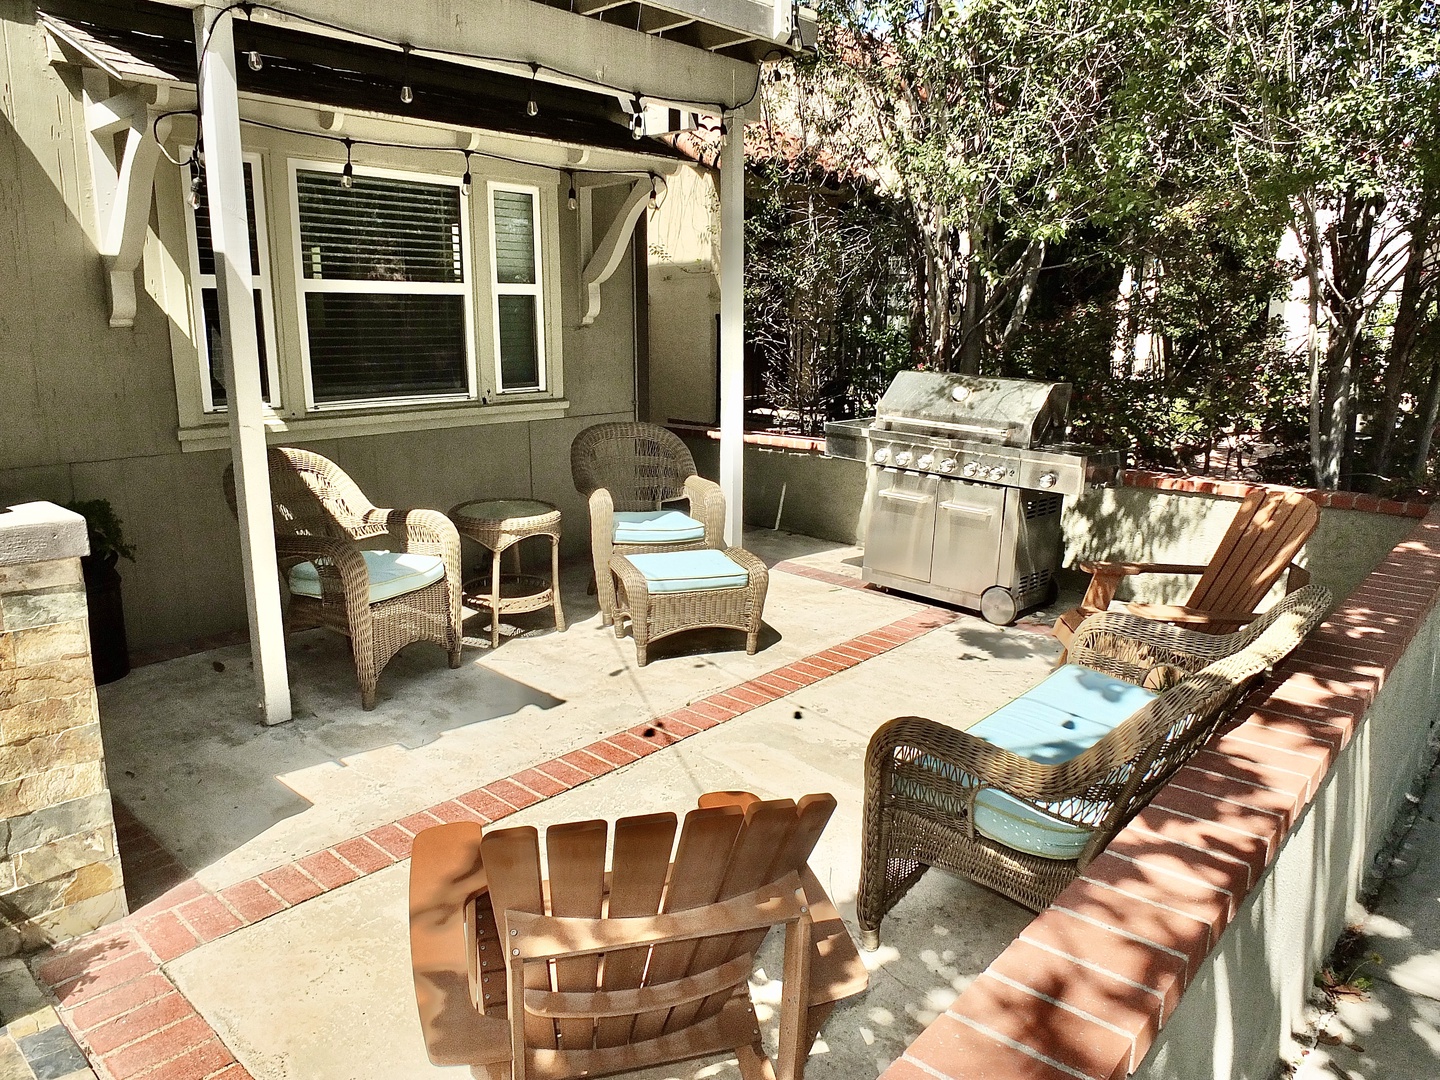 Lounge the day away & grill in the sunshine in the front patio area